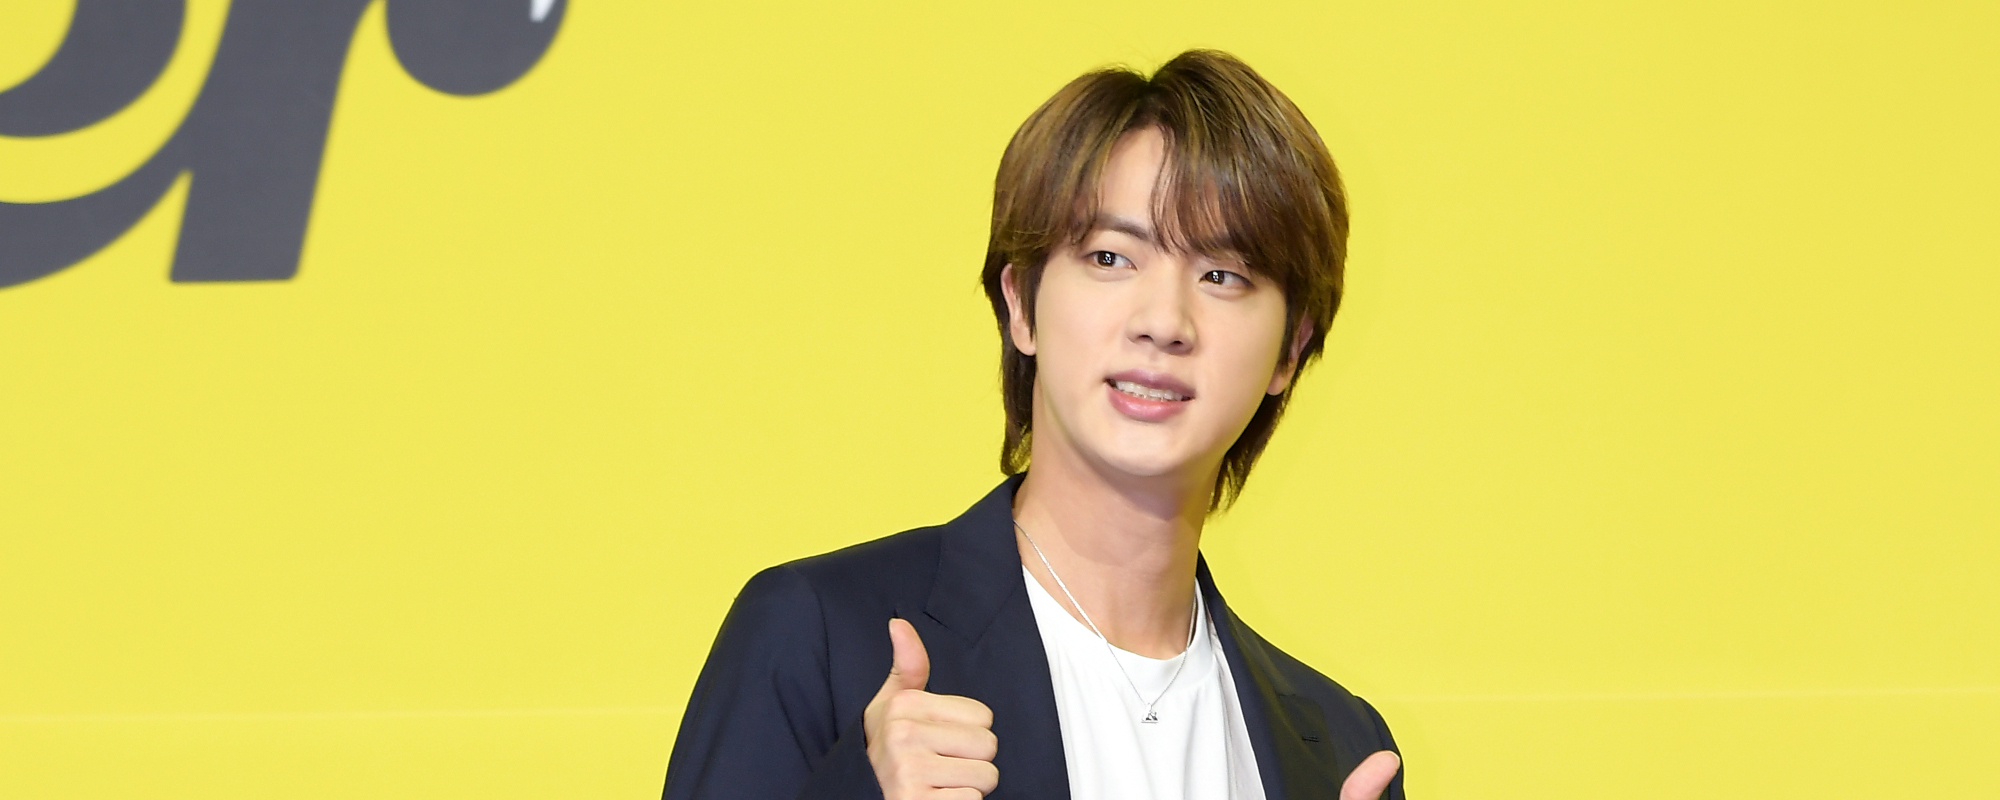 BTS’ Jin Shares Message With Fans While Serving in Military: “I’ll Be Back Soon”